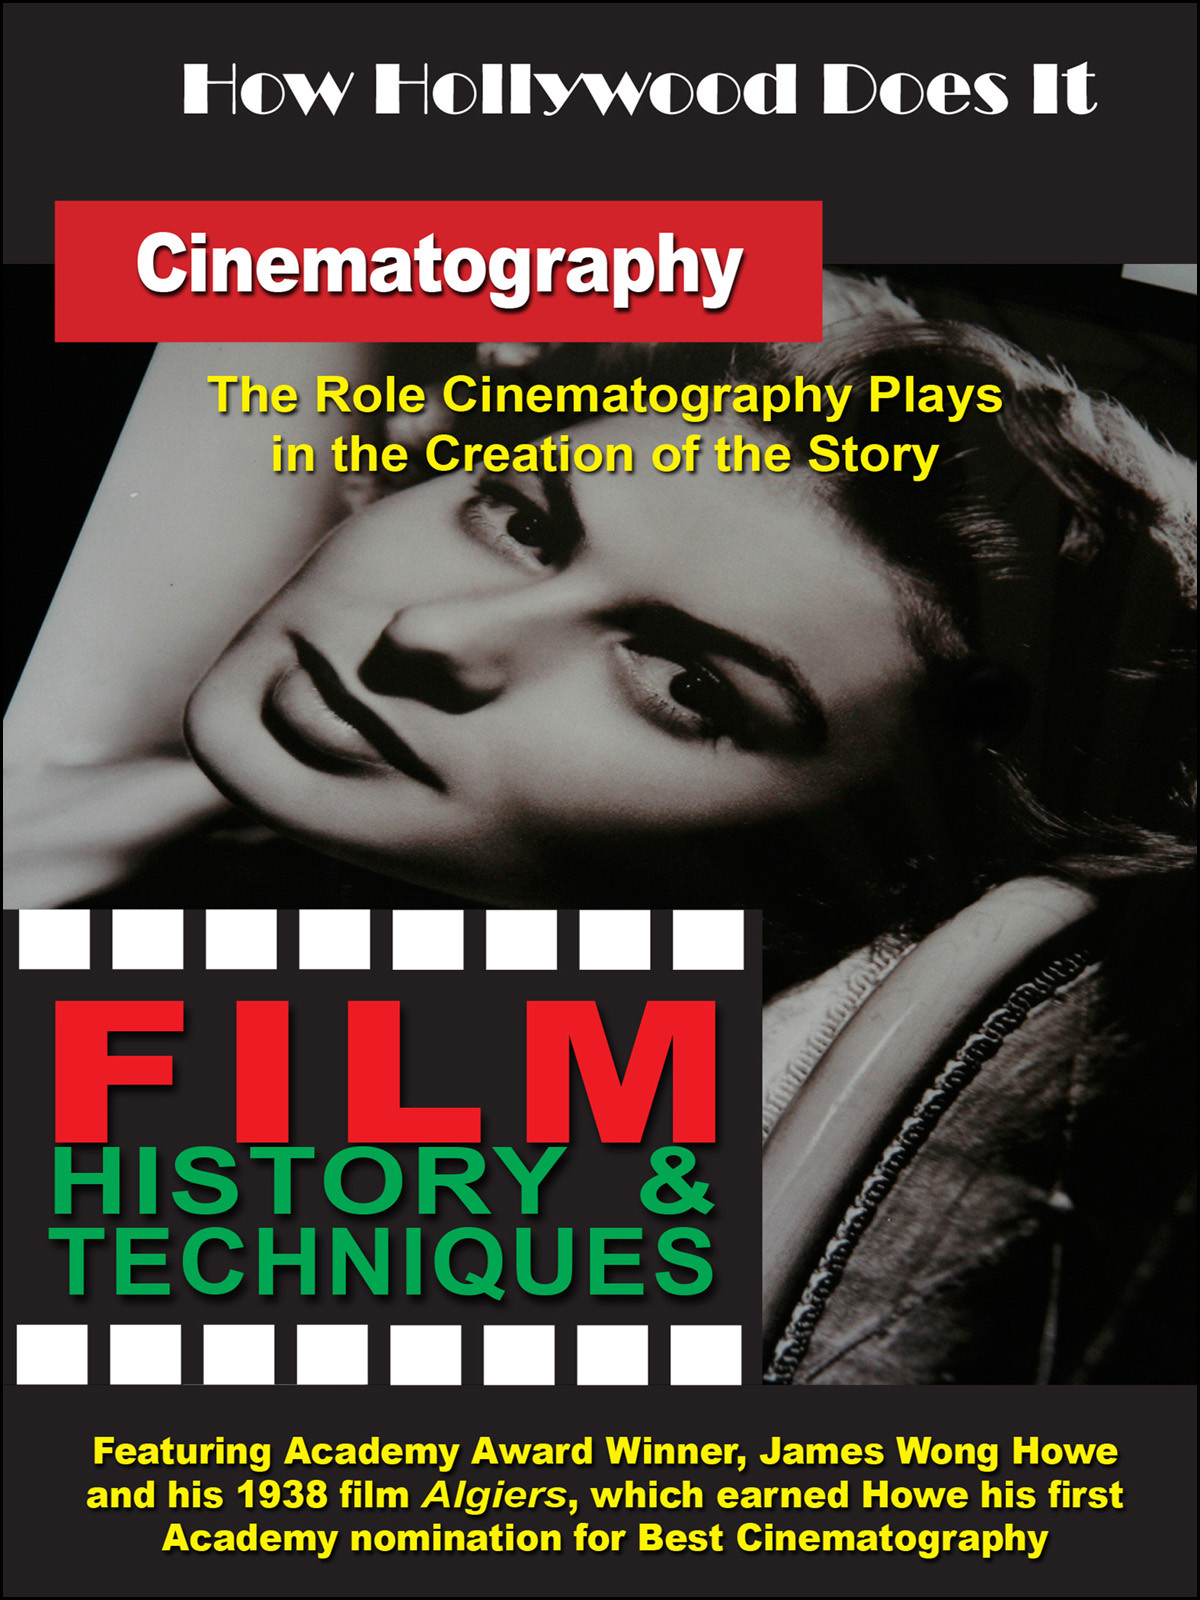 F2718 - How Hollywood Does It - Film History & Techniques of Cinematography